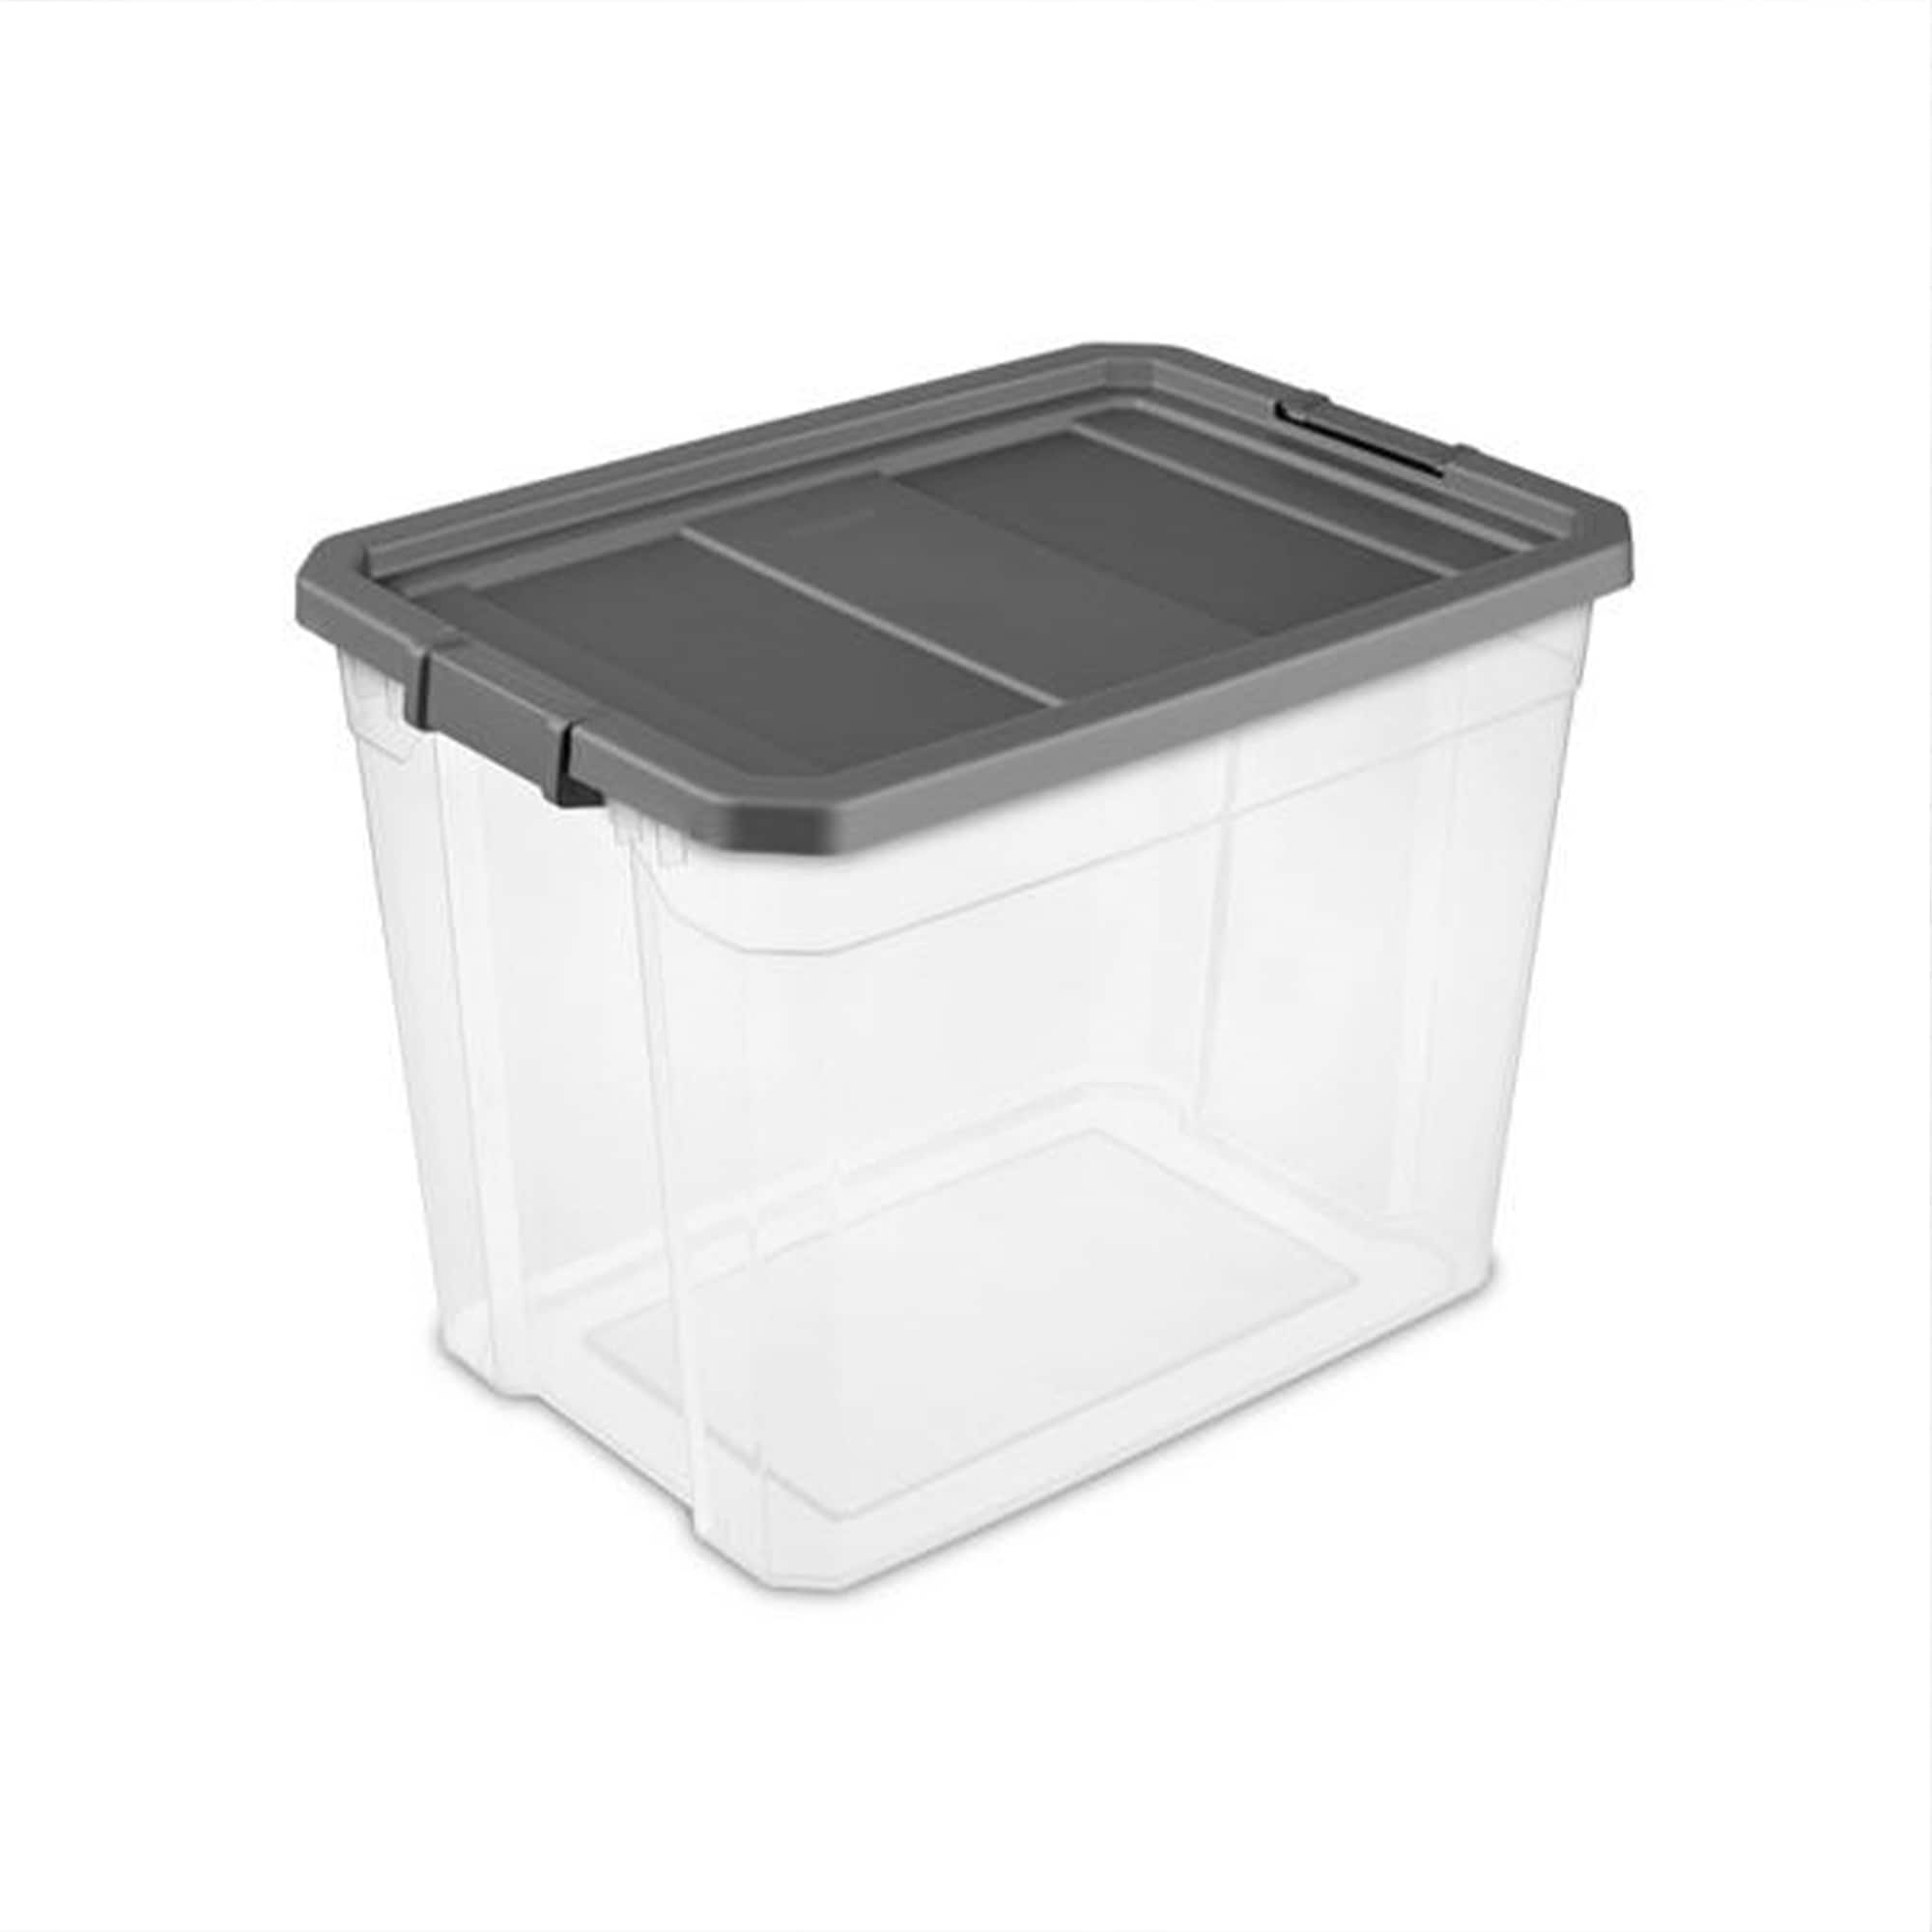 Sterilite Clear Plastic Storage Containers at Lowes.com